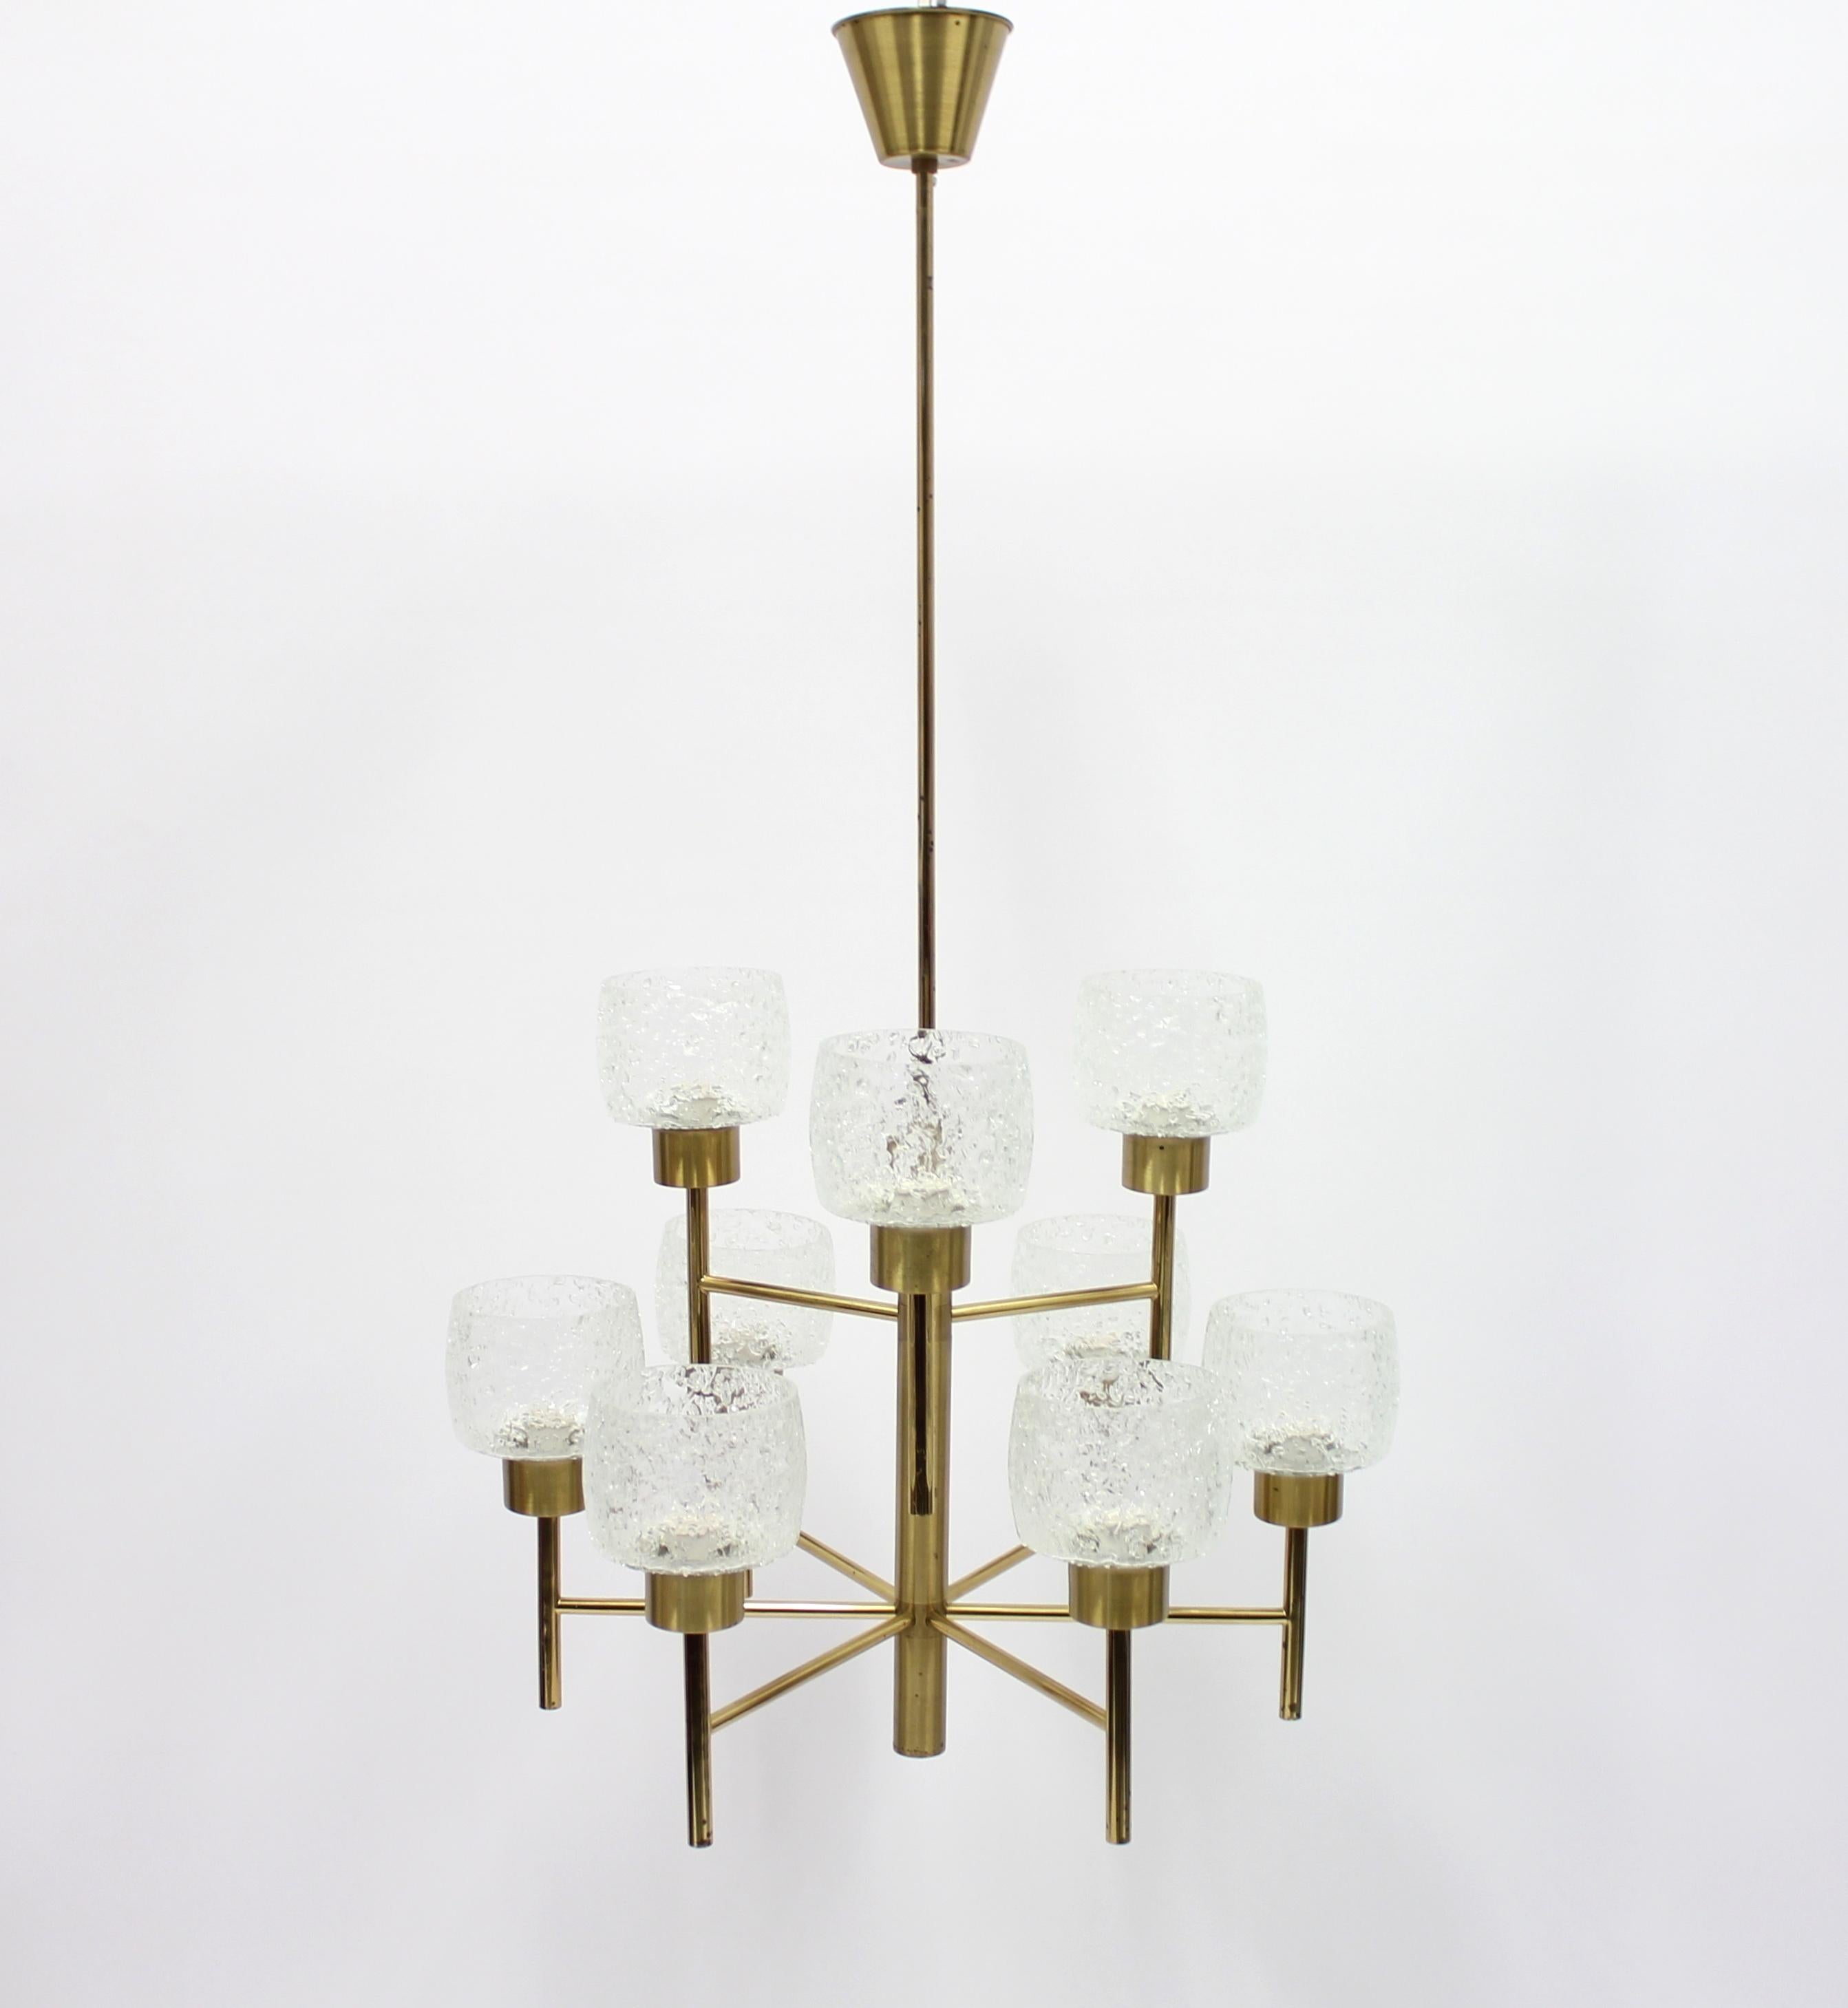 Large 1960s 9-light brass chandelier with glass shades. Most likely a Swedish manufacture. Restored electric components. Good vintage condition.